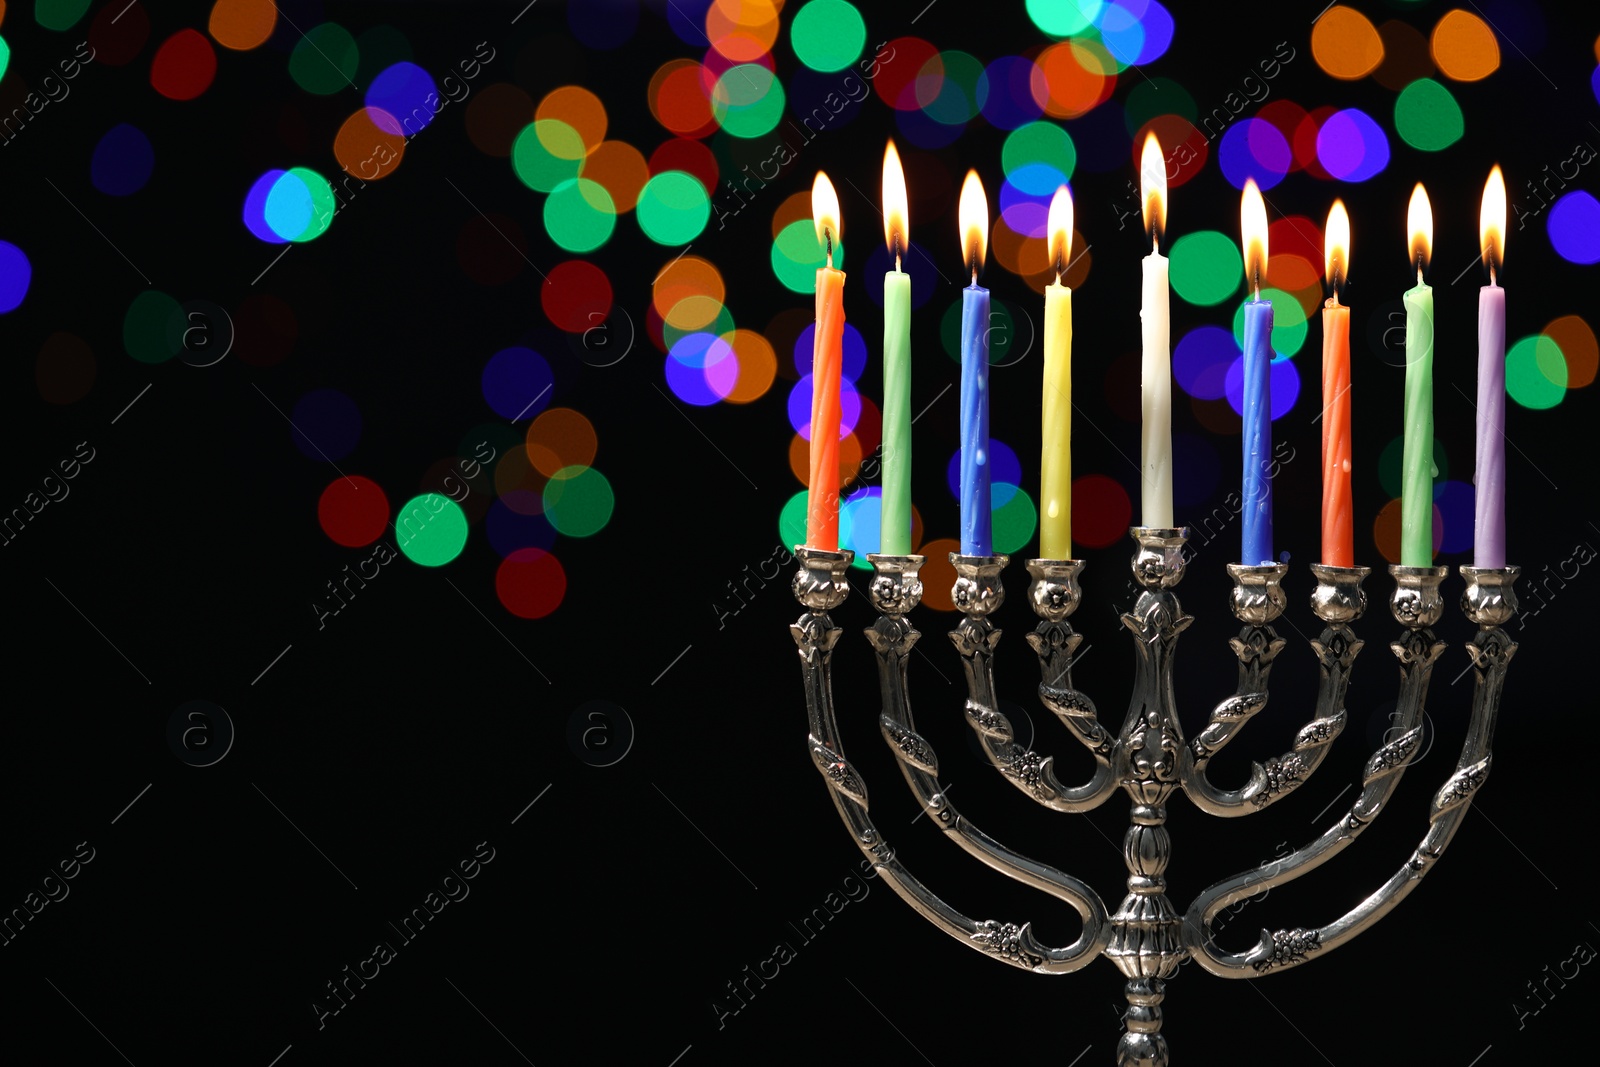 Photo of Hanukkah celebration. Menorah with burning candles against dark background with blurred lights, space for text